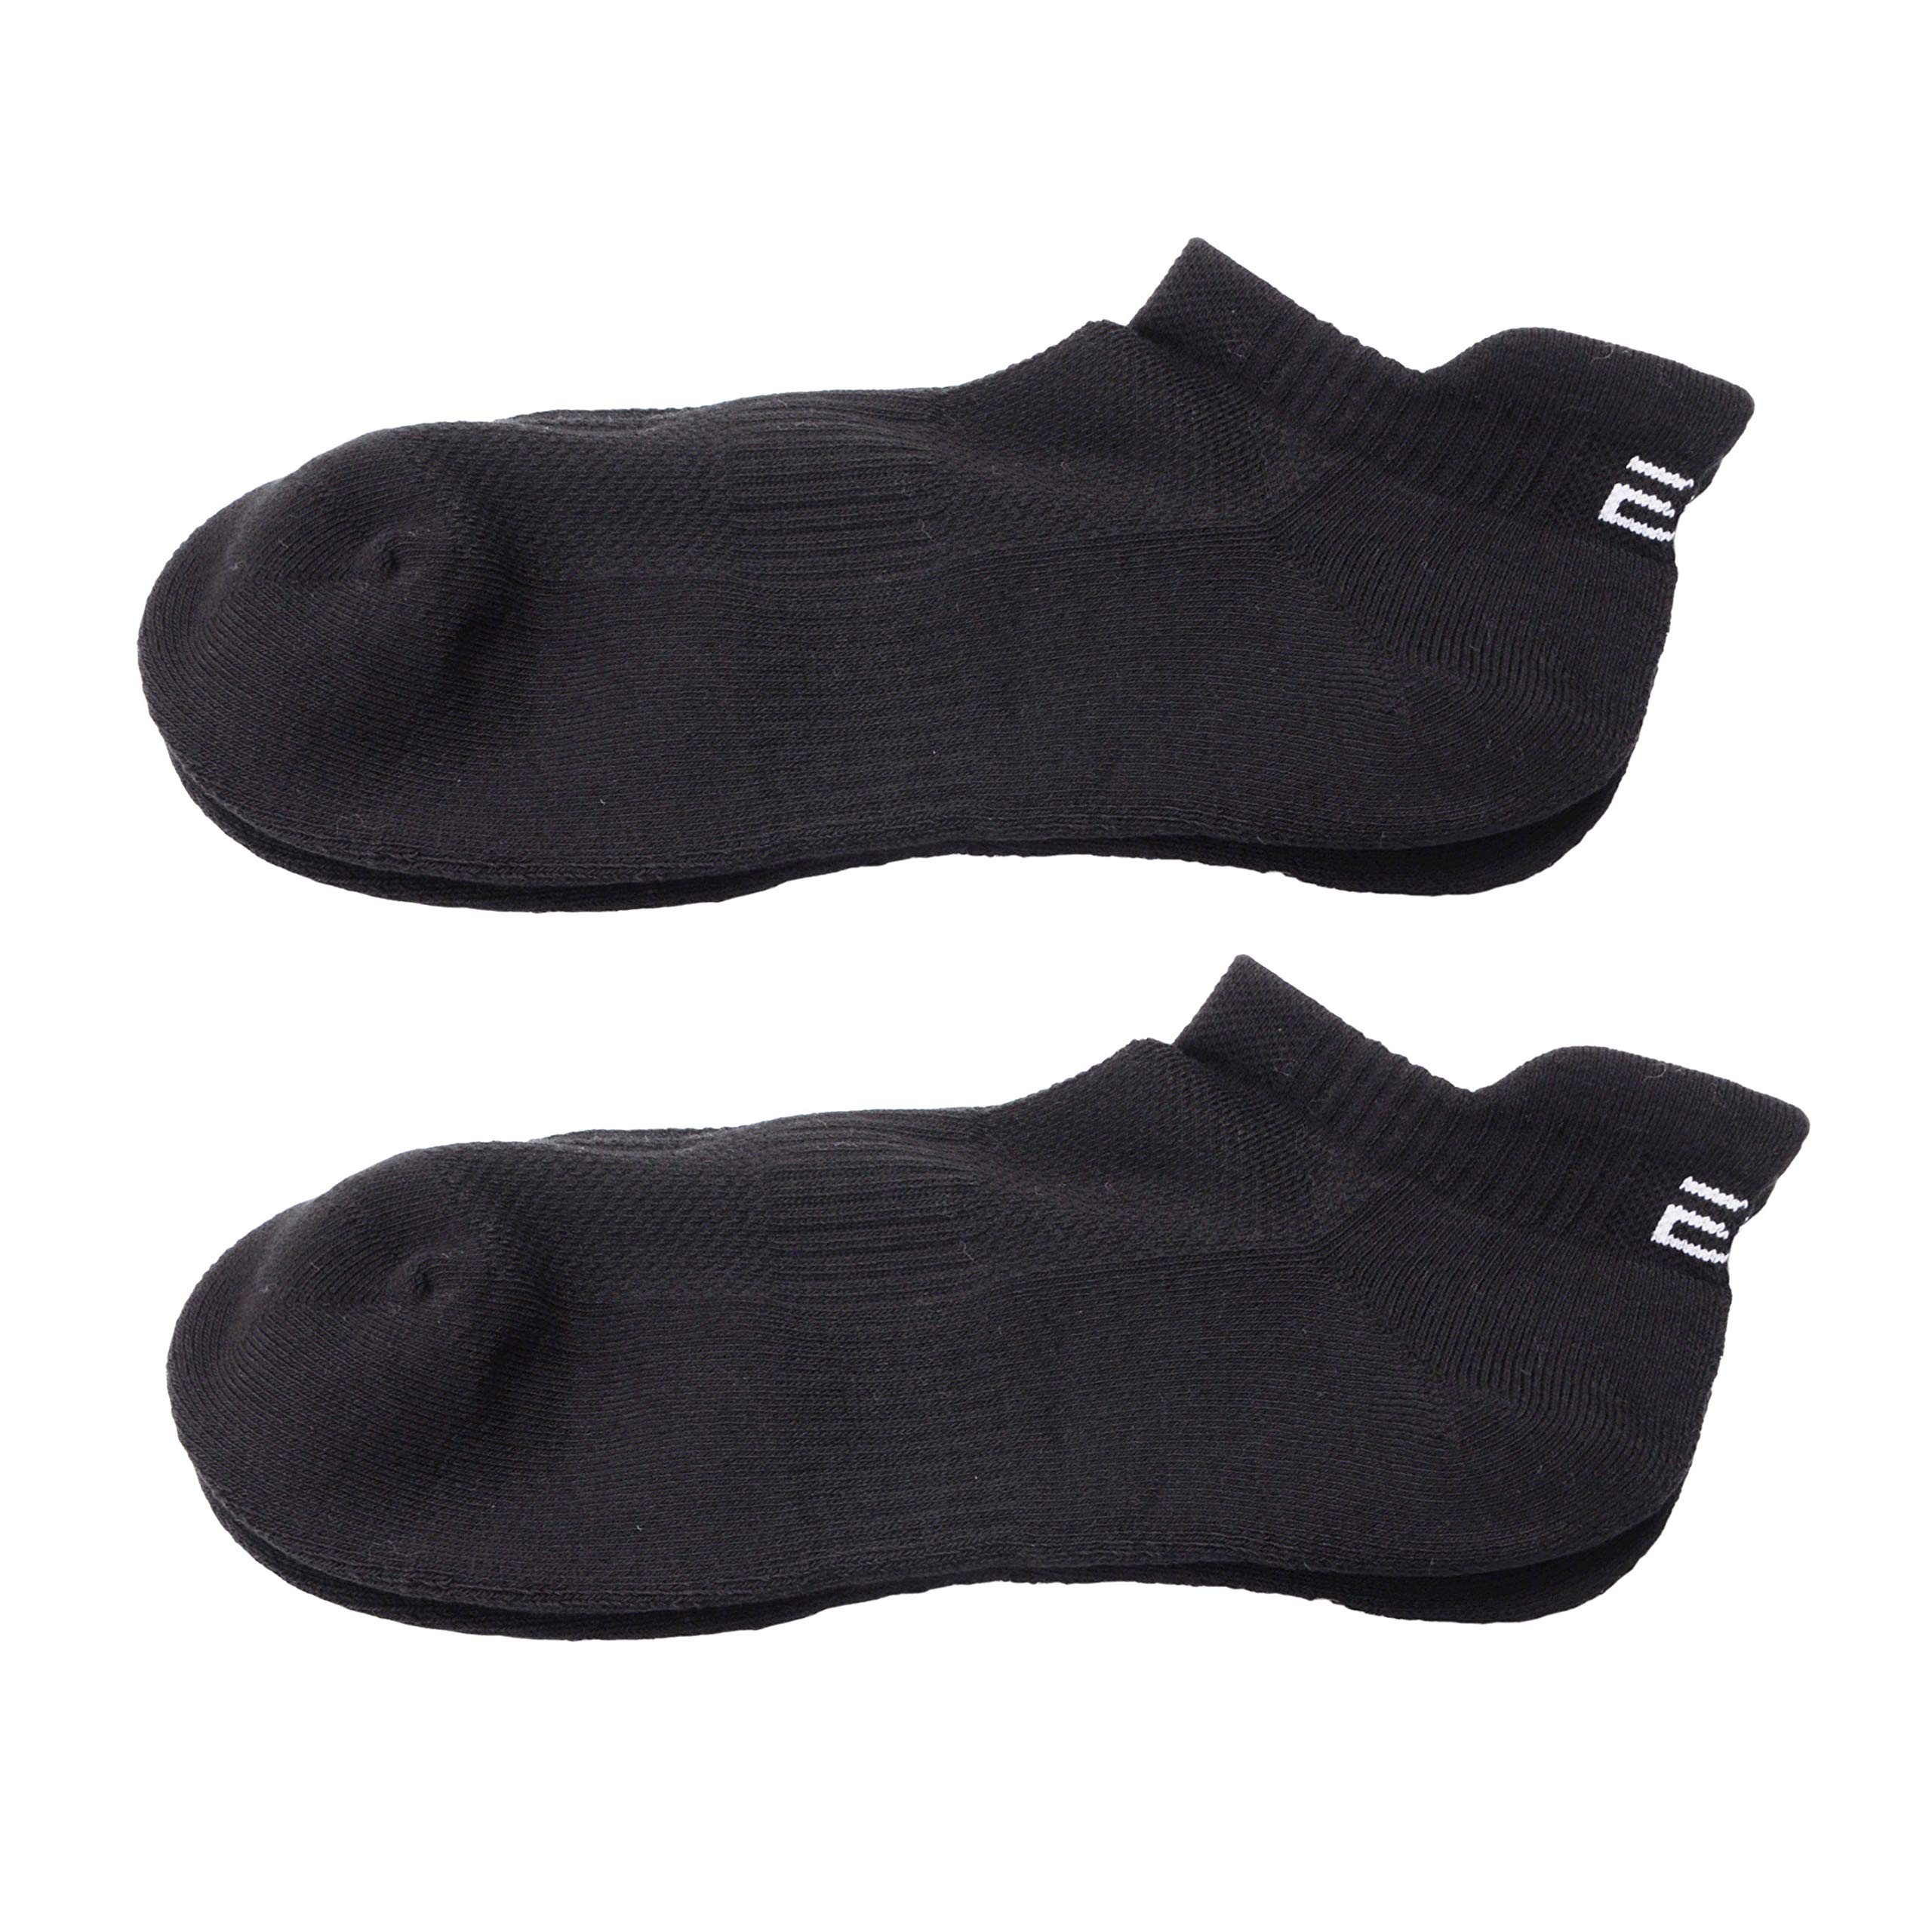 EVERSWE 6 Pairs Ankle Athletic Running Socks Low Cut Sports Tab Socks for Men and Women (Black, S)